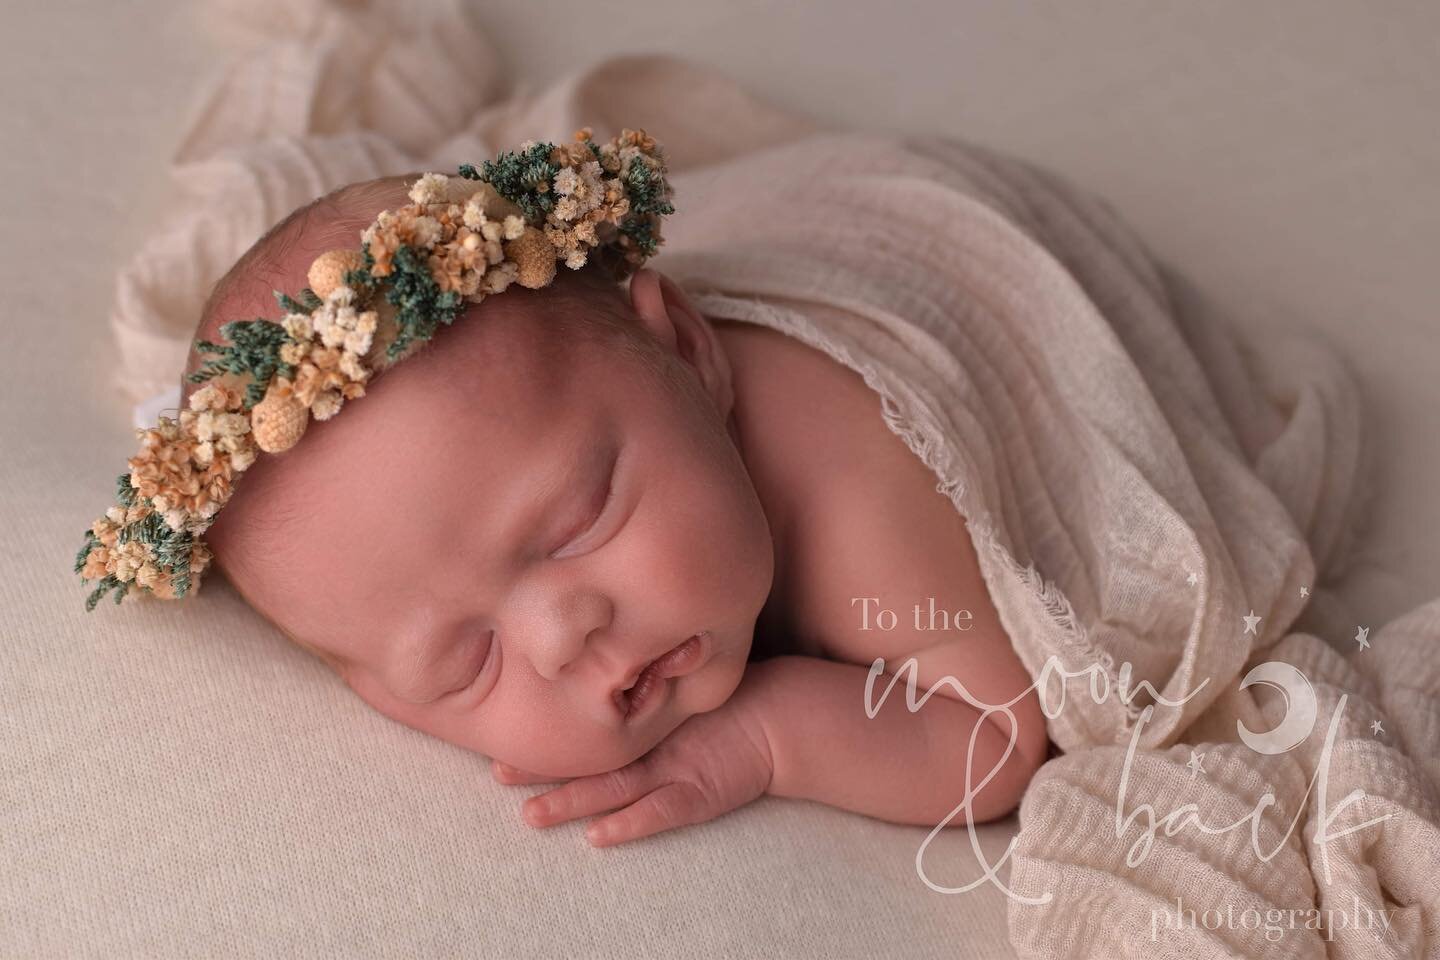 Don&rsquo;t miss out on those precious newborn memories 💕
Newborn sessions are done in the first 3 weeks to get these gorgeous sleepy, squishy shots 

Also, can we take a moment to appreciate this flower crown 🥰